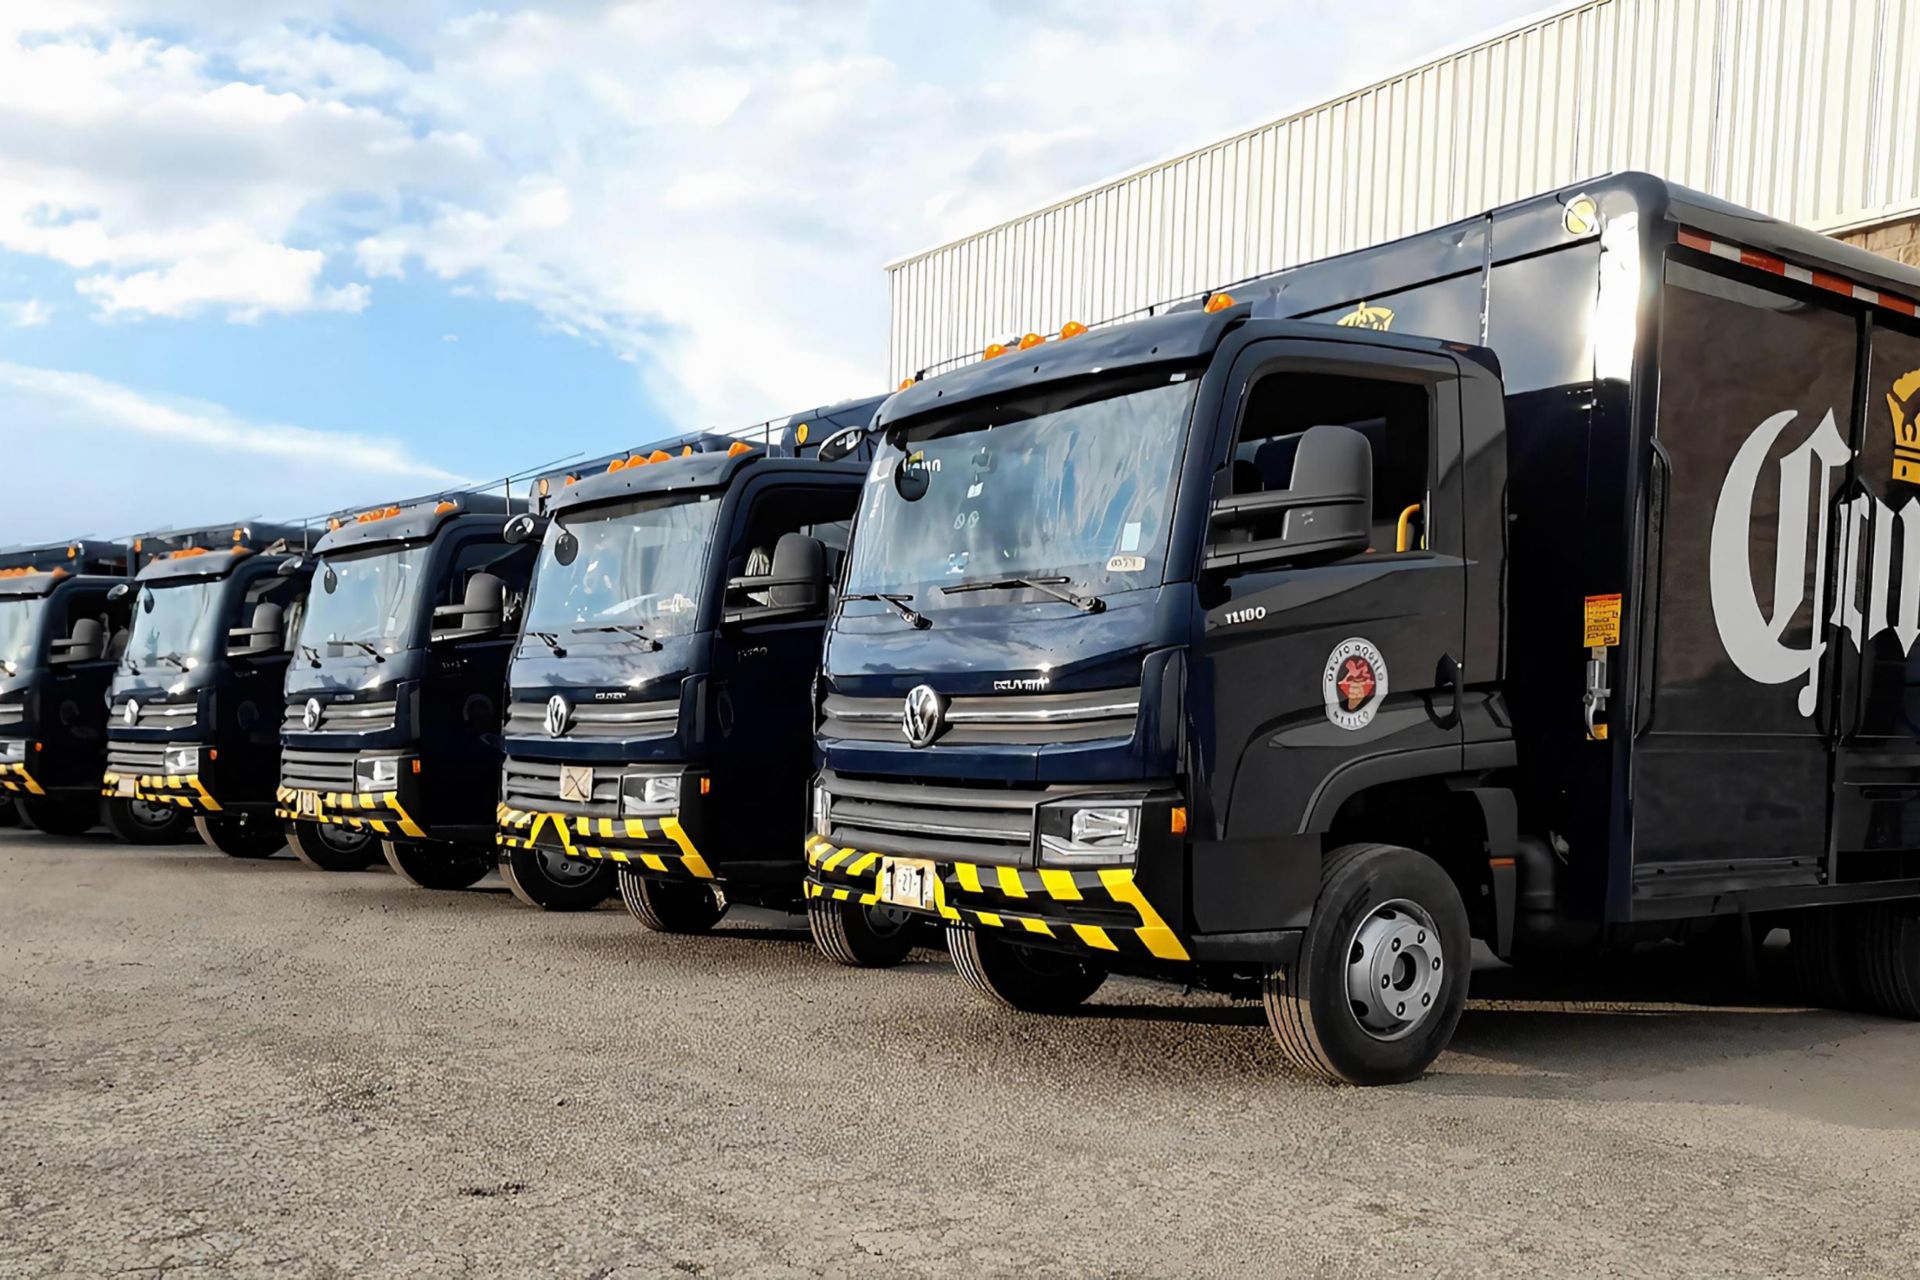 Image of several VWCO trucks in one row